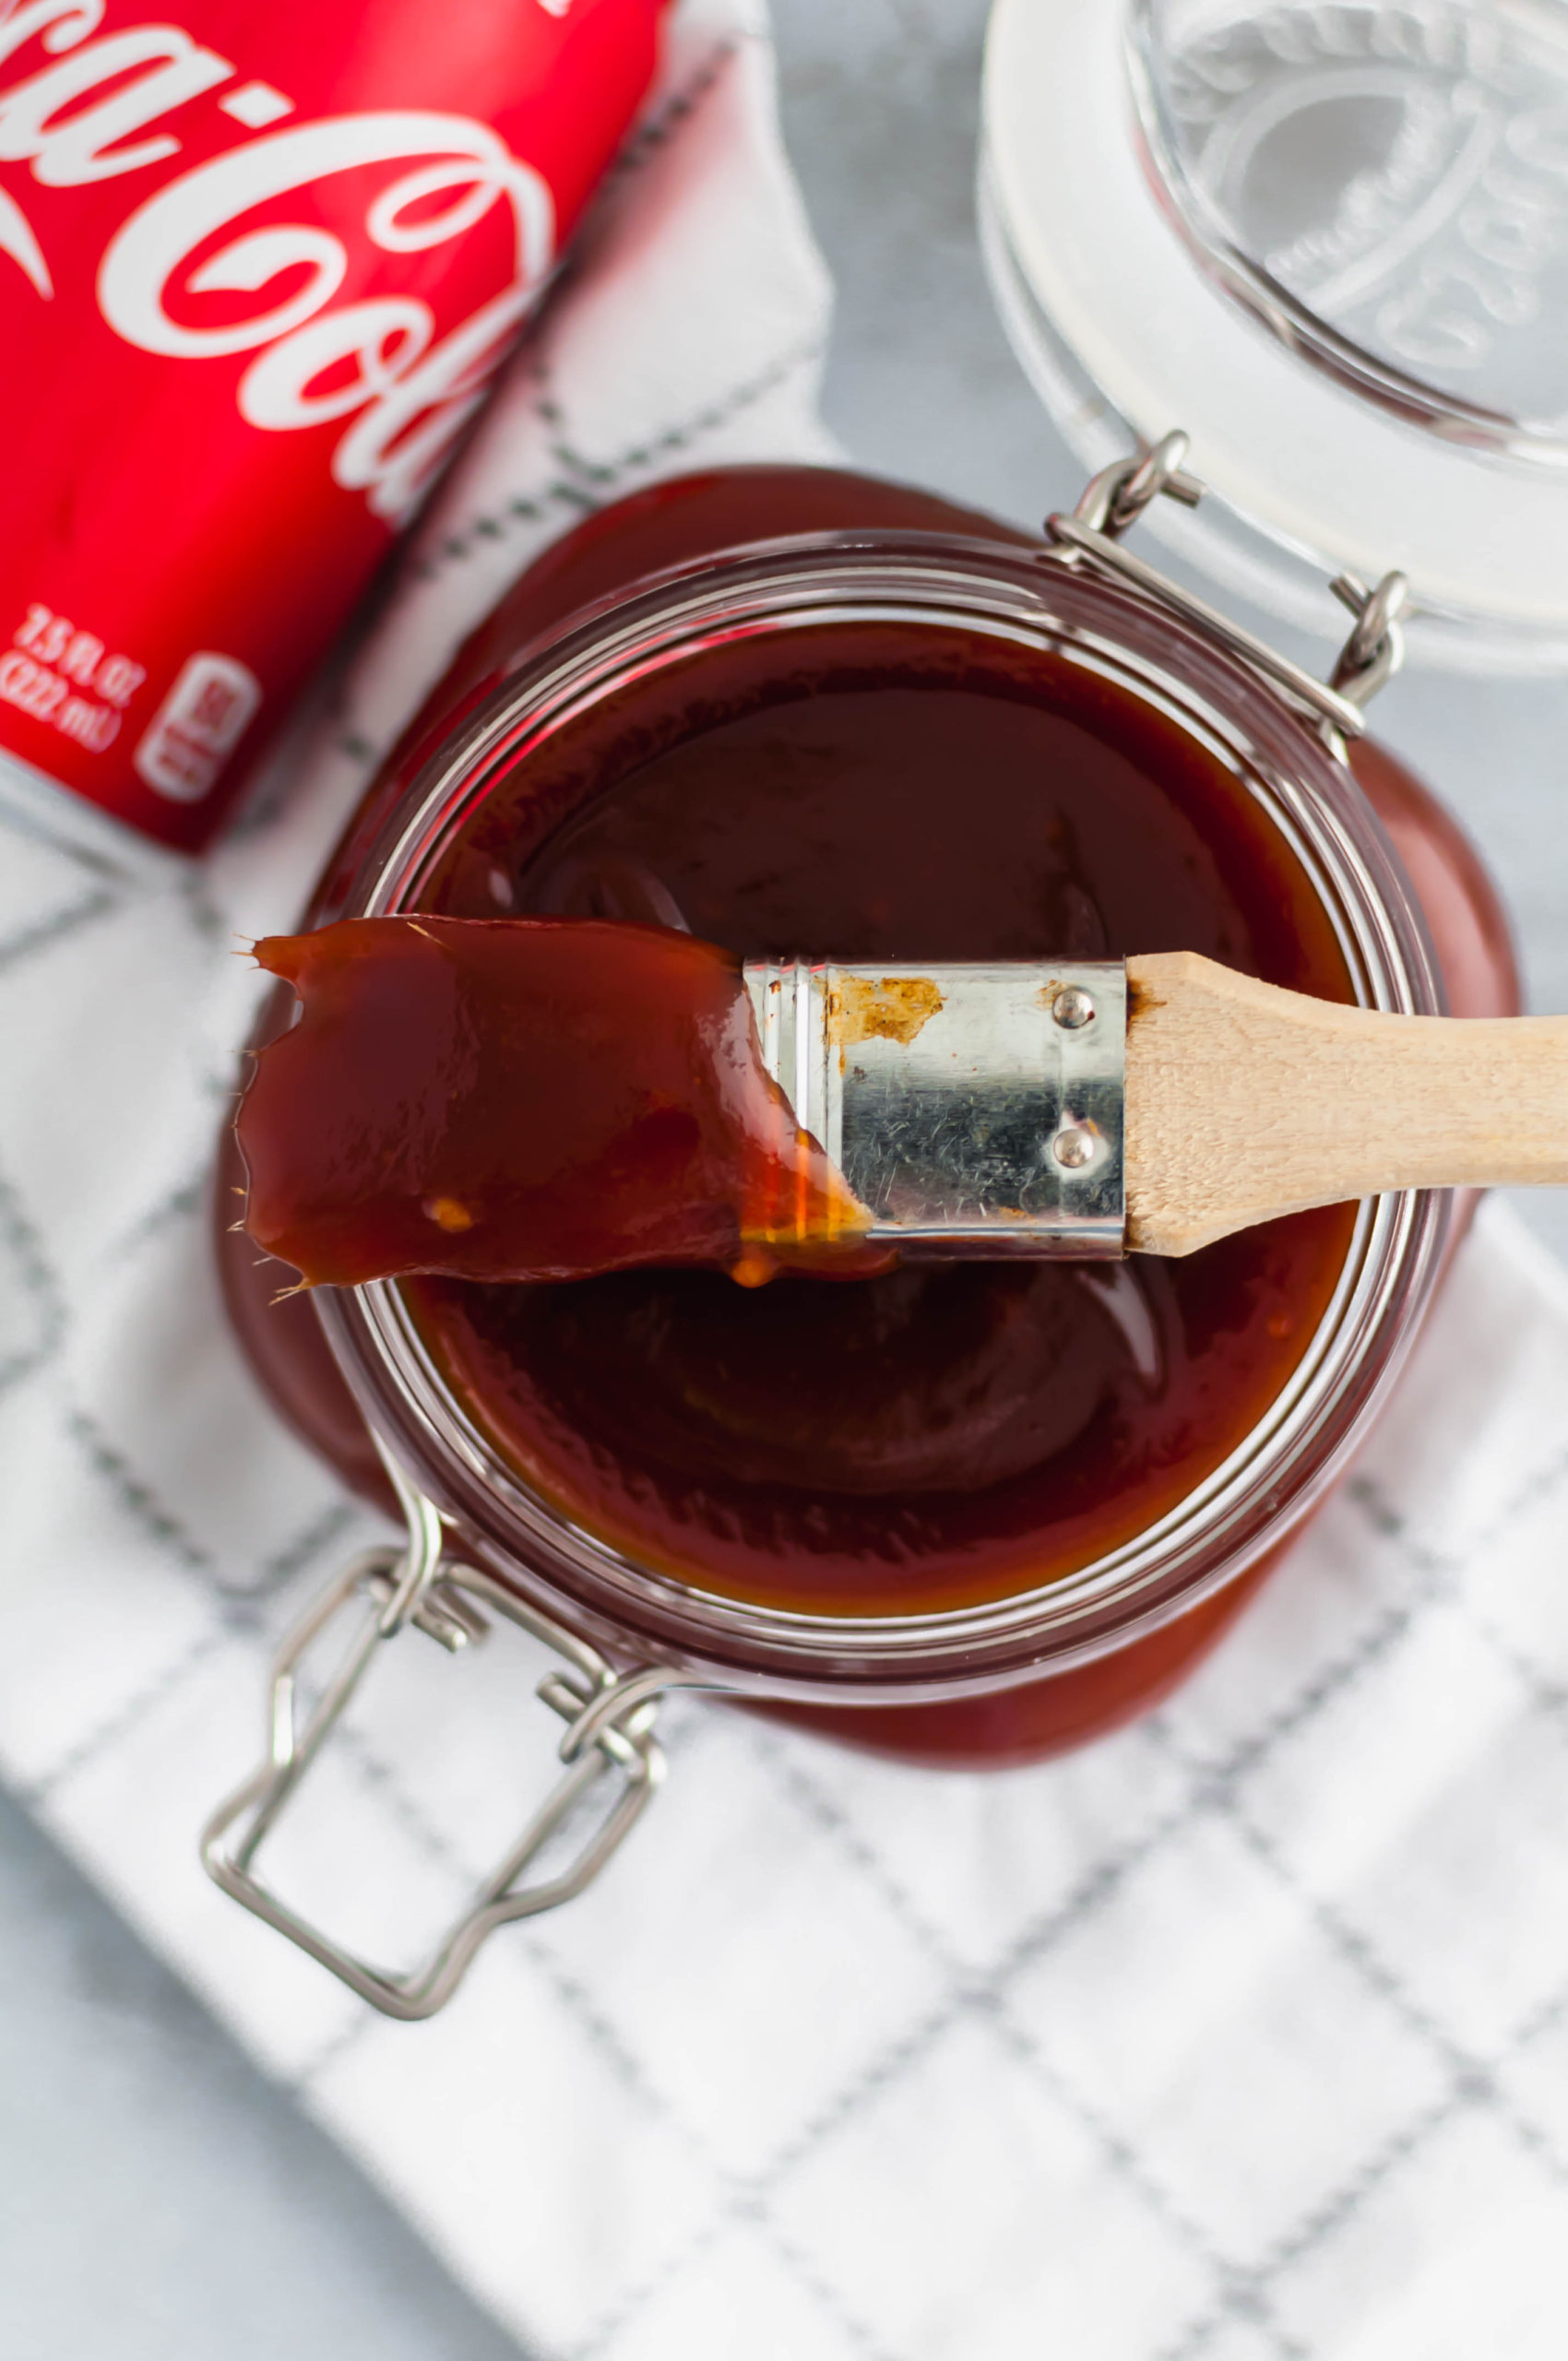 This Coca Cola BBQ Sauce is simple to make and packed with sweet and tangy flavors. Perfect for all your summer grilling.